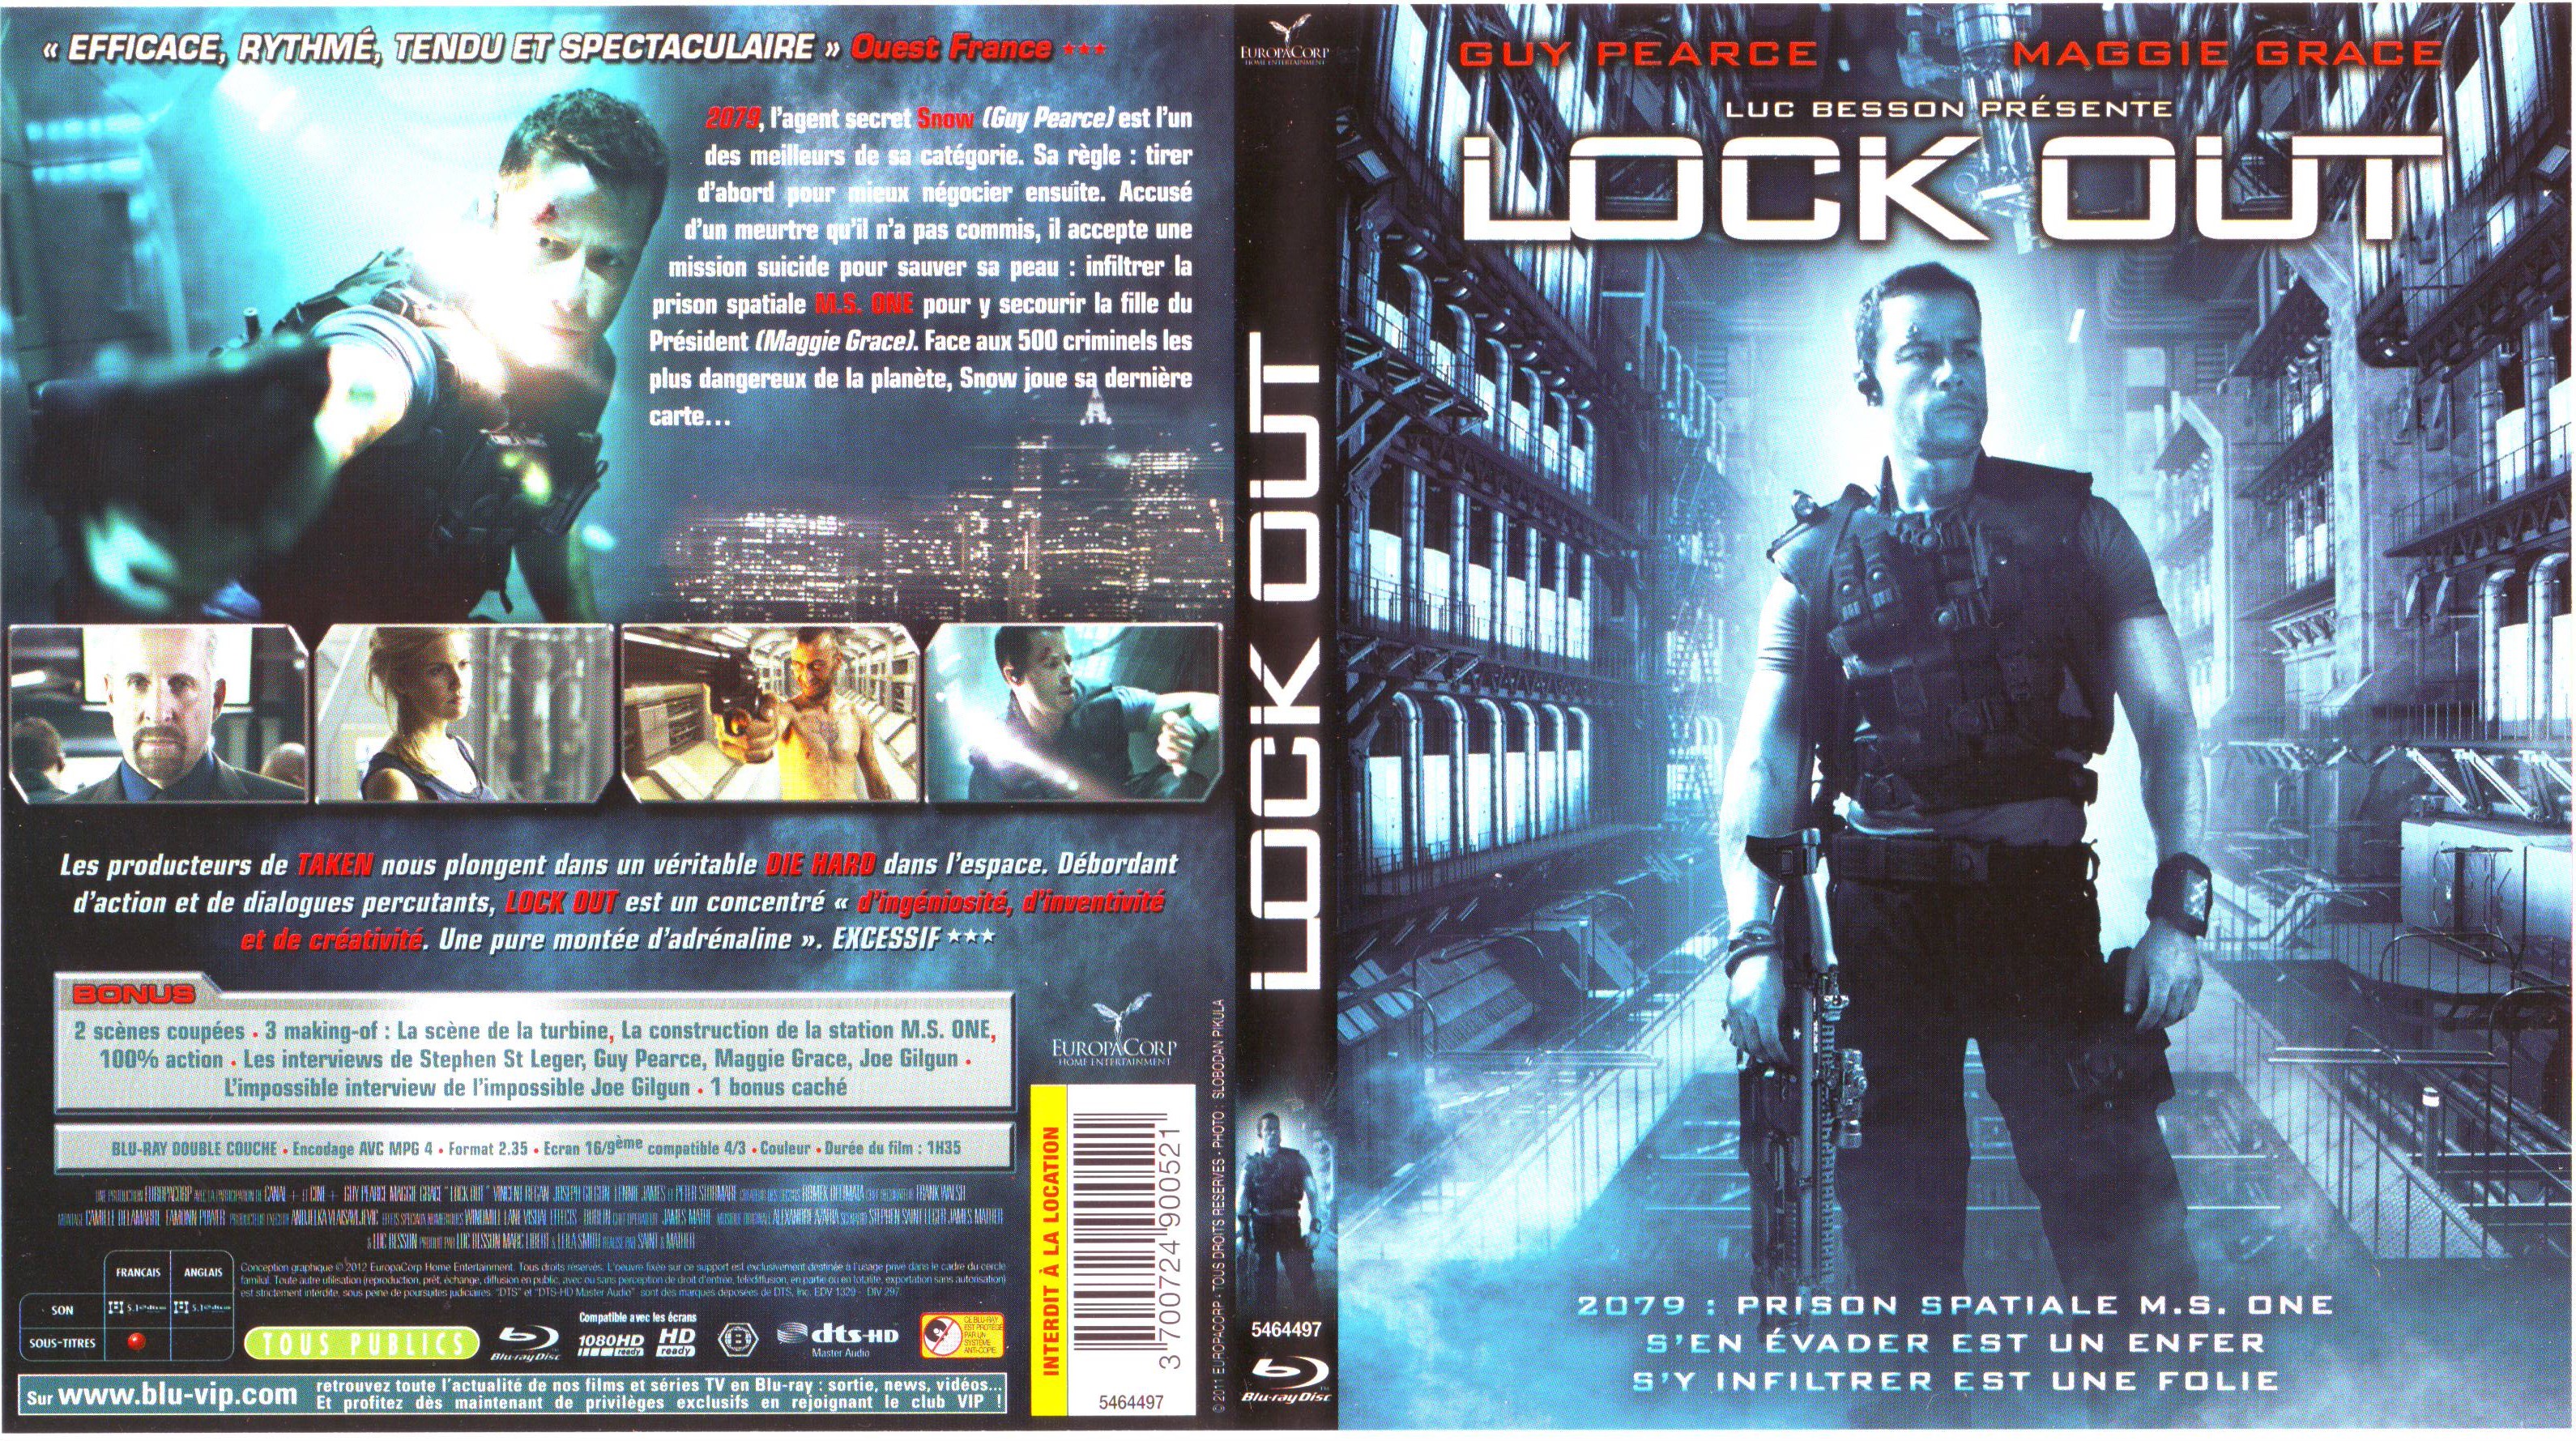 Jaquette DVD Lock out (BLU-RAY)